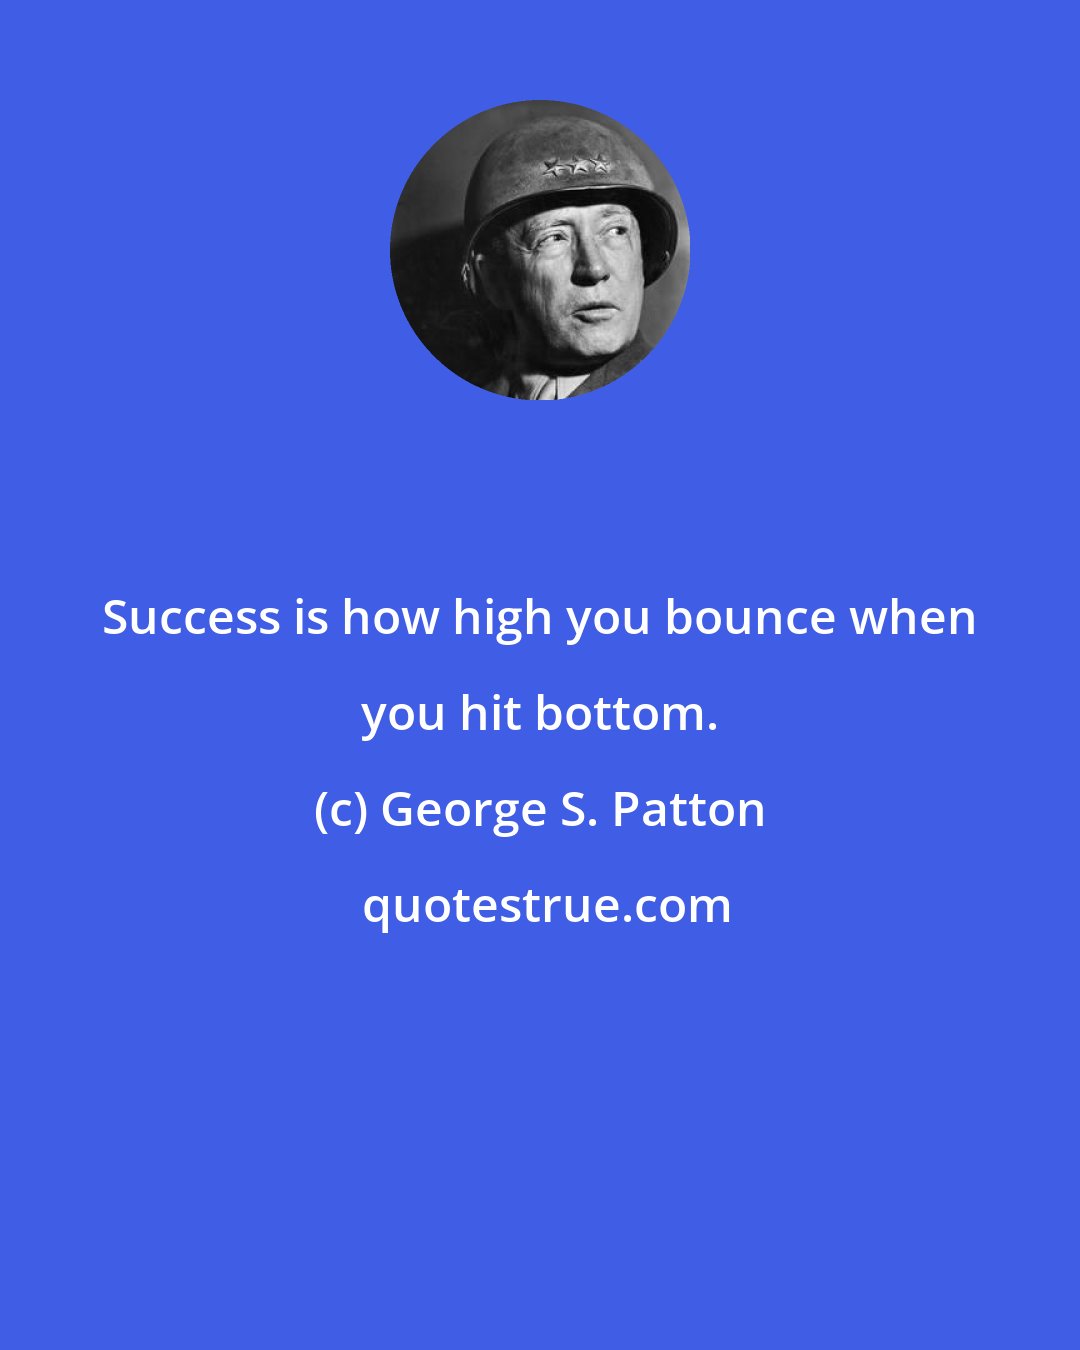 George S. Patton: Success is how high you bounce when you hit bottom.